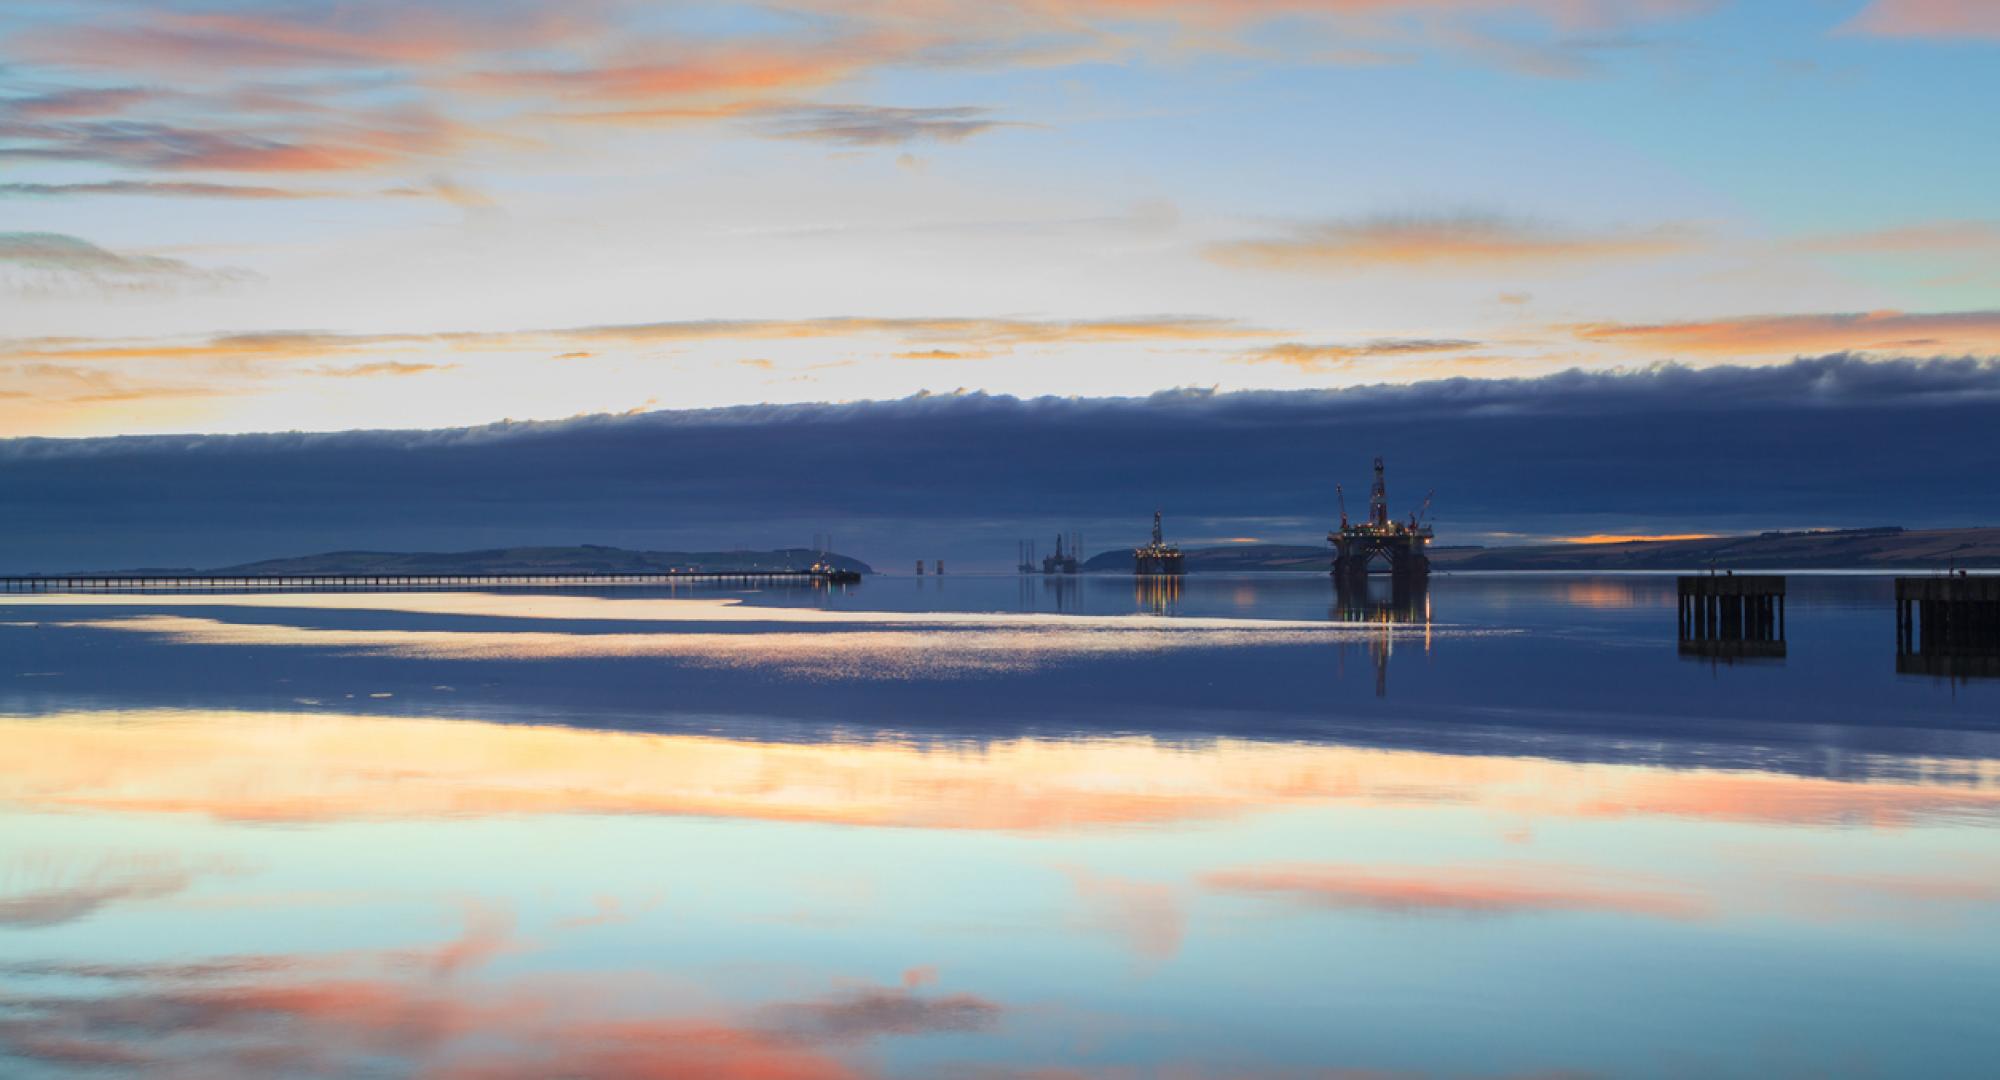 Semi Submersible Oil Rig during Sunrise at Cromarty Firth in Invergordon, Scotland